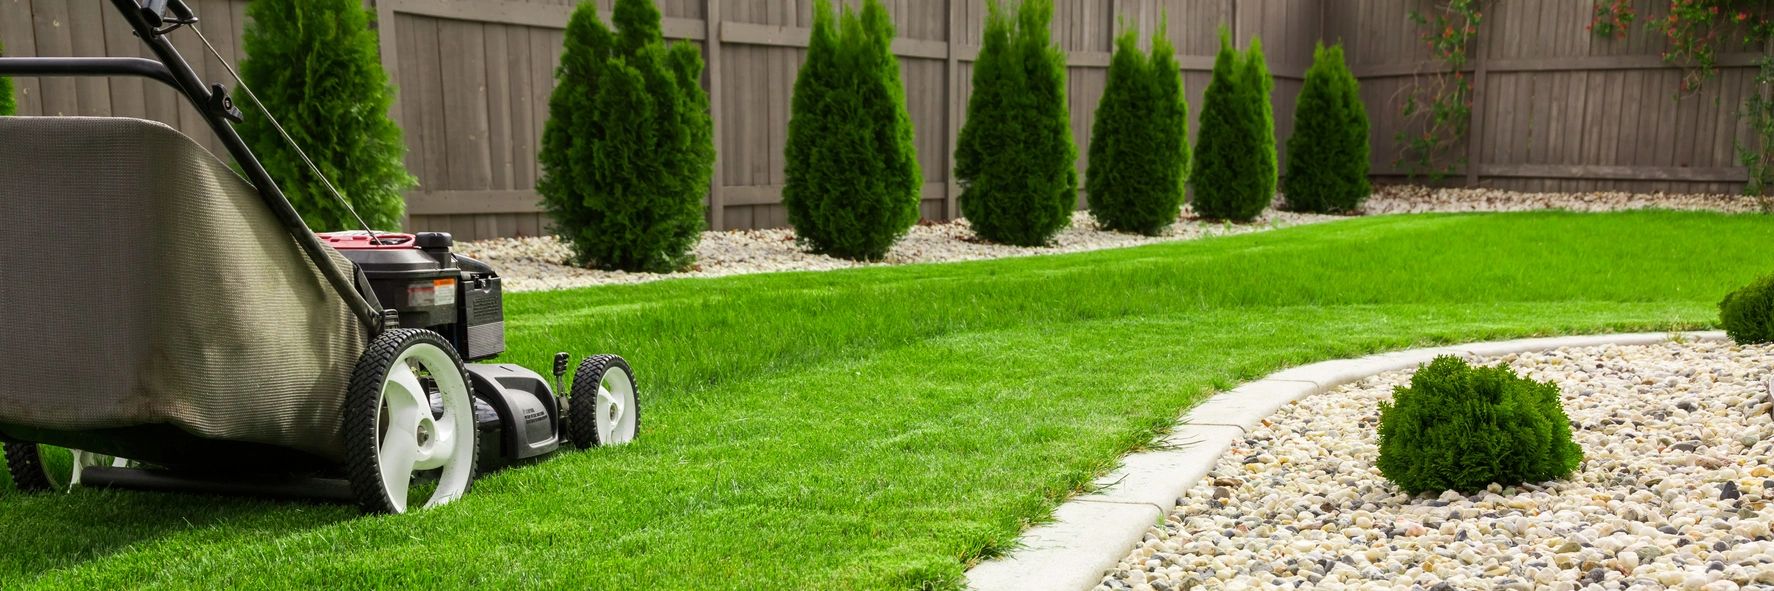 Sustainable Gardening: Creating an Eco-friendly Lawn Care for Your Home